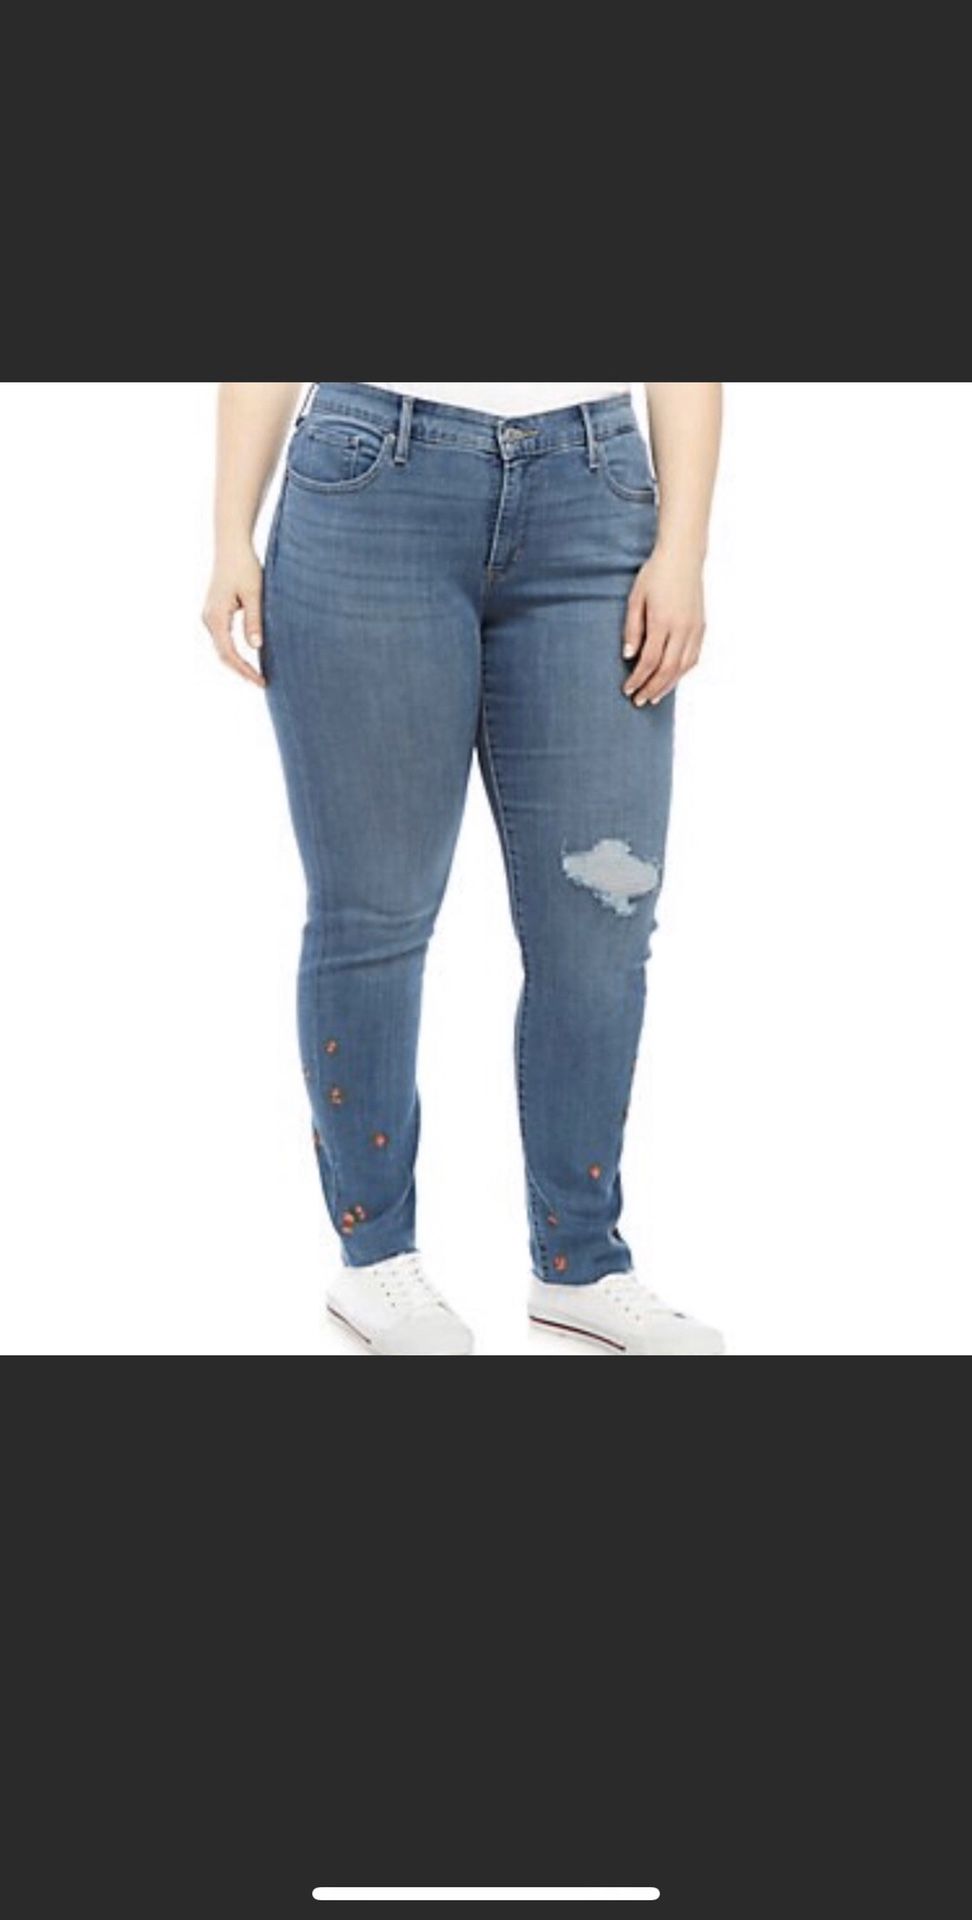 Levi's 311 Shaping Embroidered Jeans (Plus Size -20W)